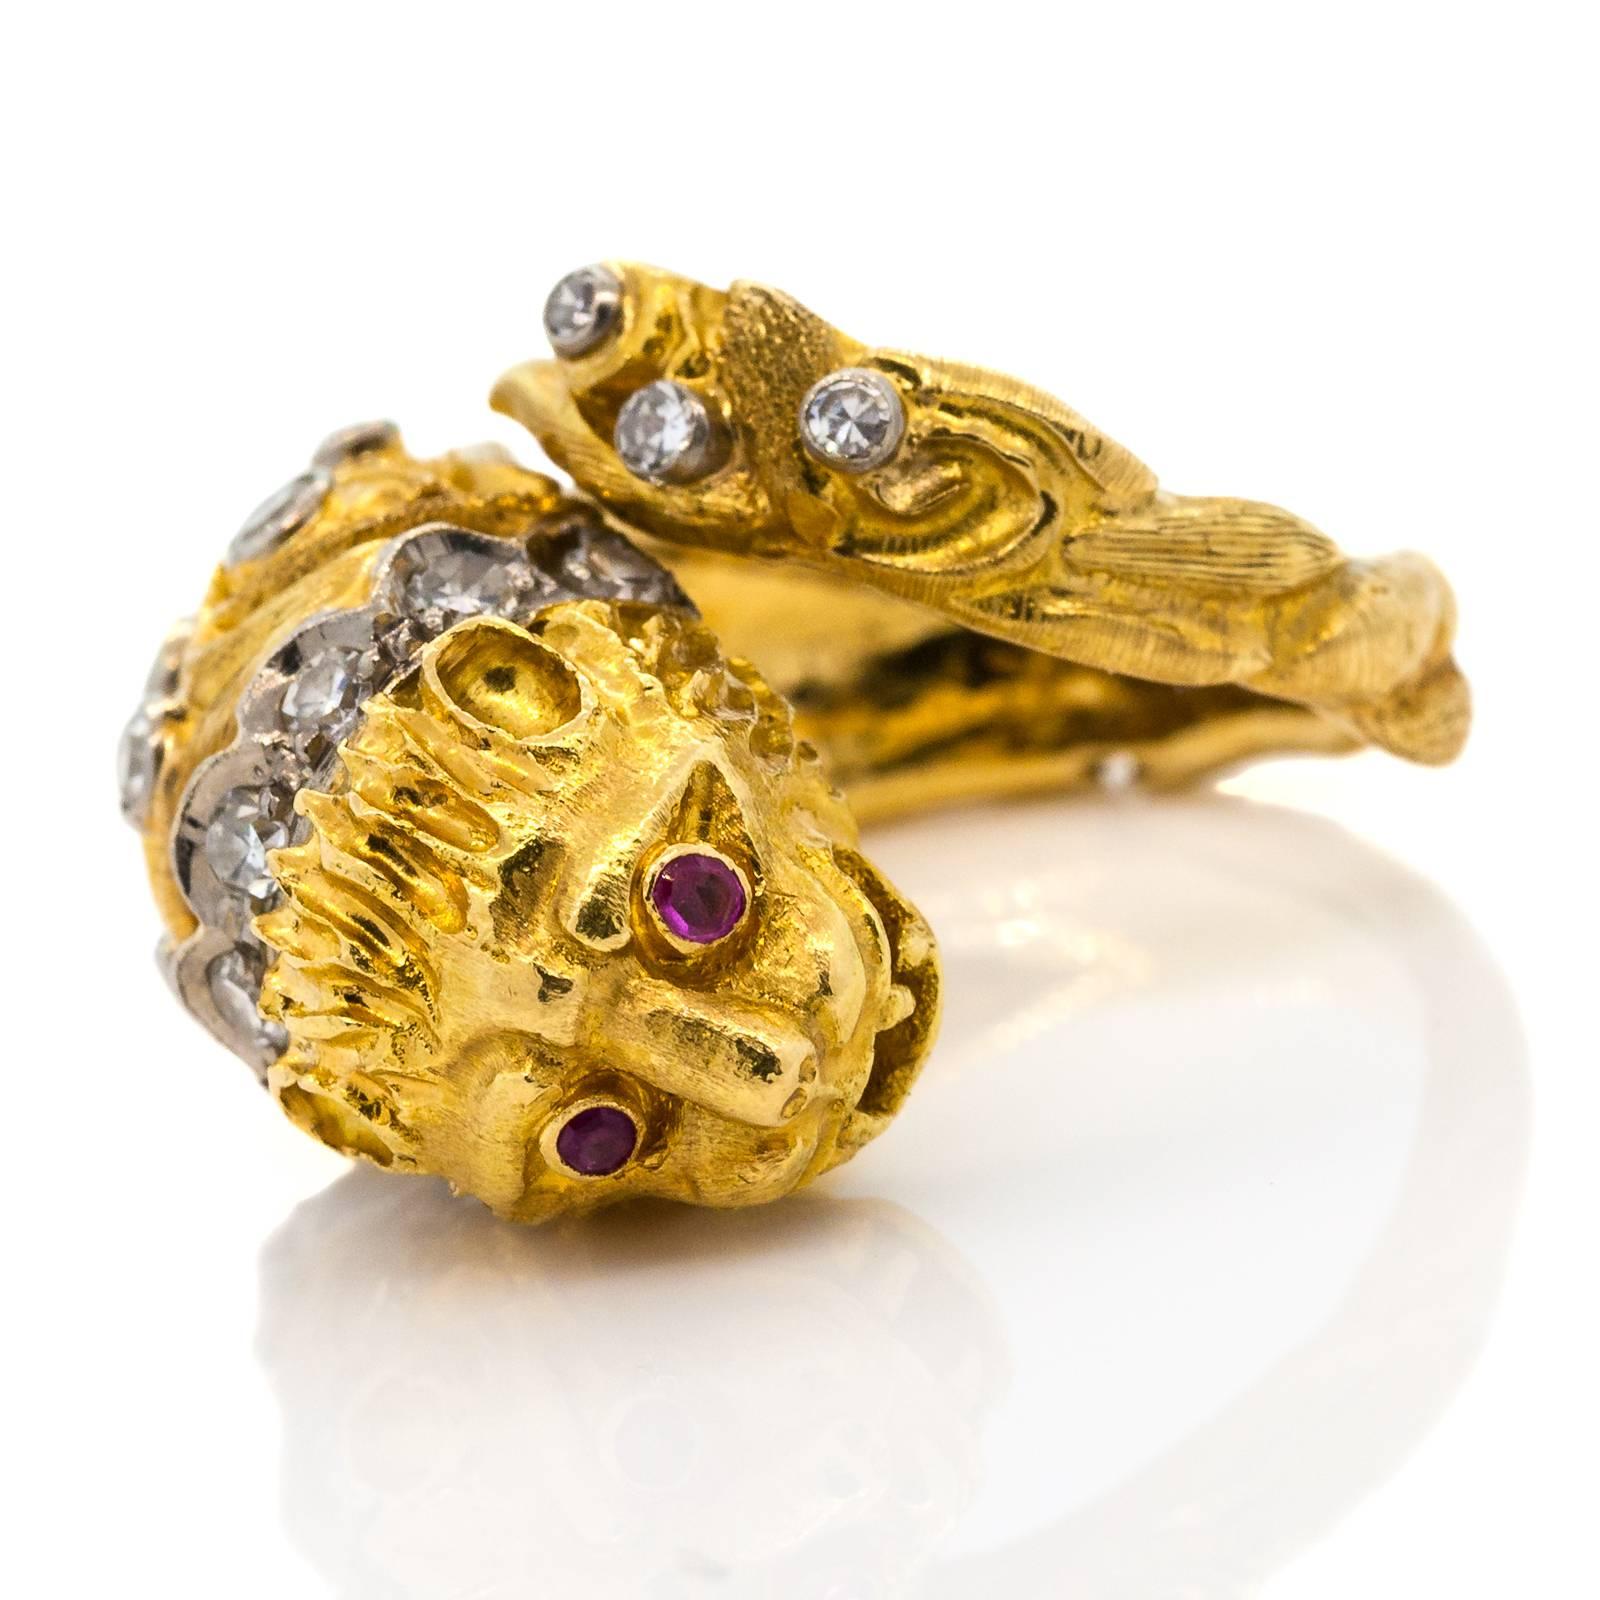 gold lion head ring meaning